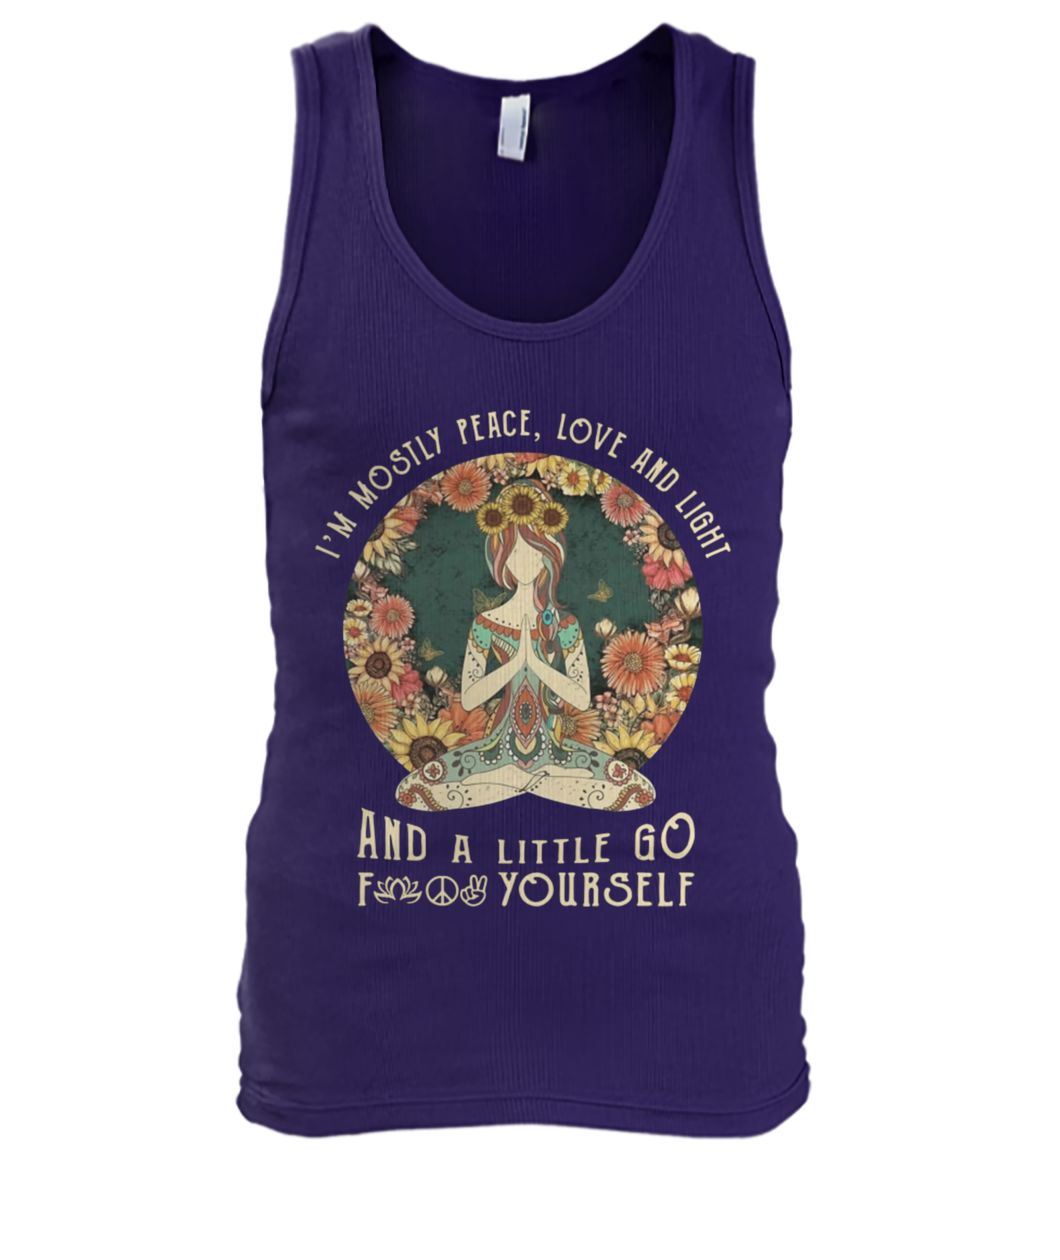 Yoga I’m mostly peace love and light and a little go fuck yourself vintage men's tank top